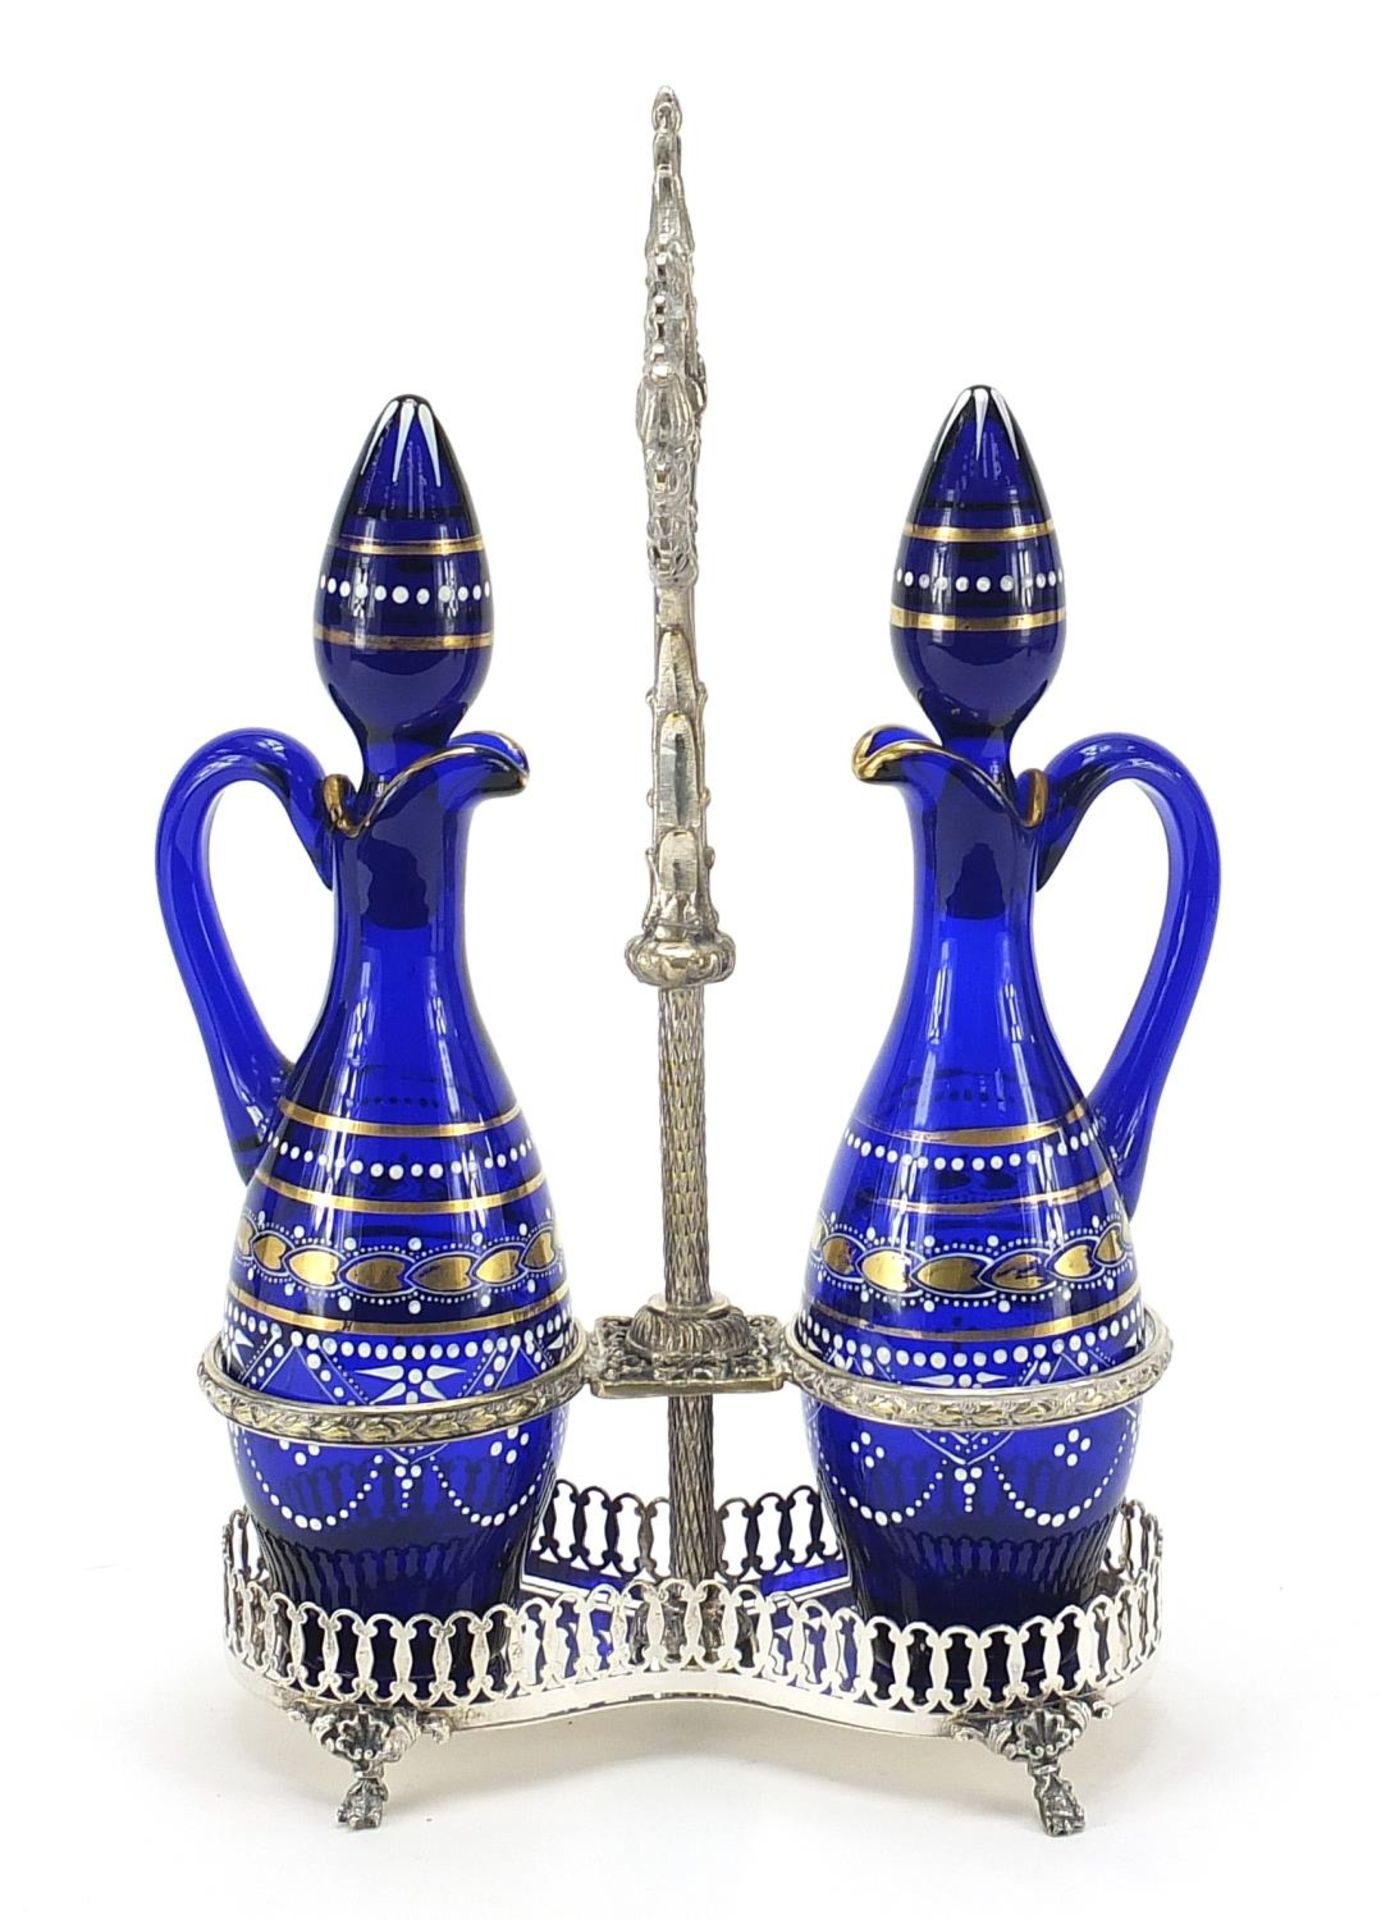 Silver plated oil and vinegar bottle stand with blue glass decanters, 35cm high